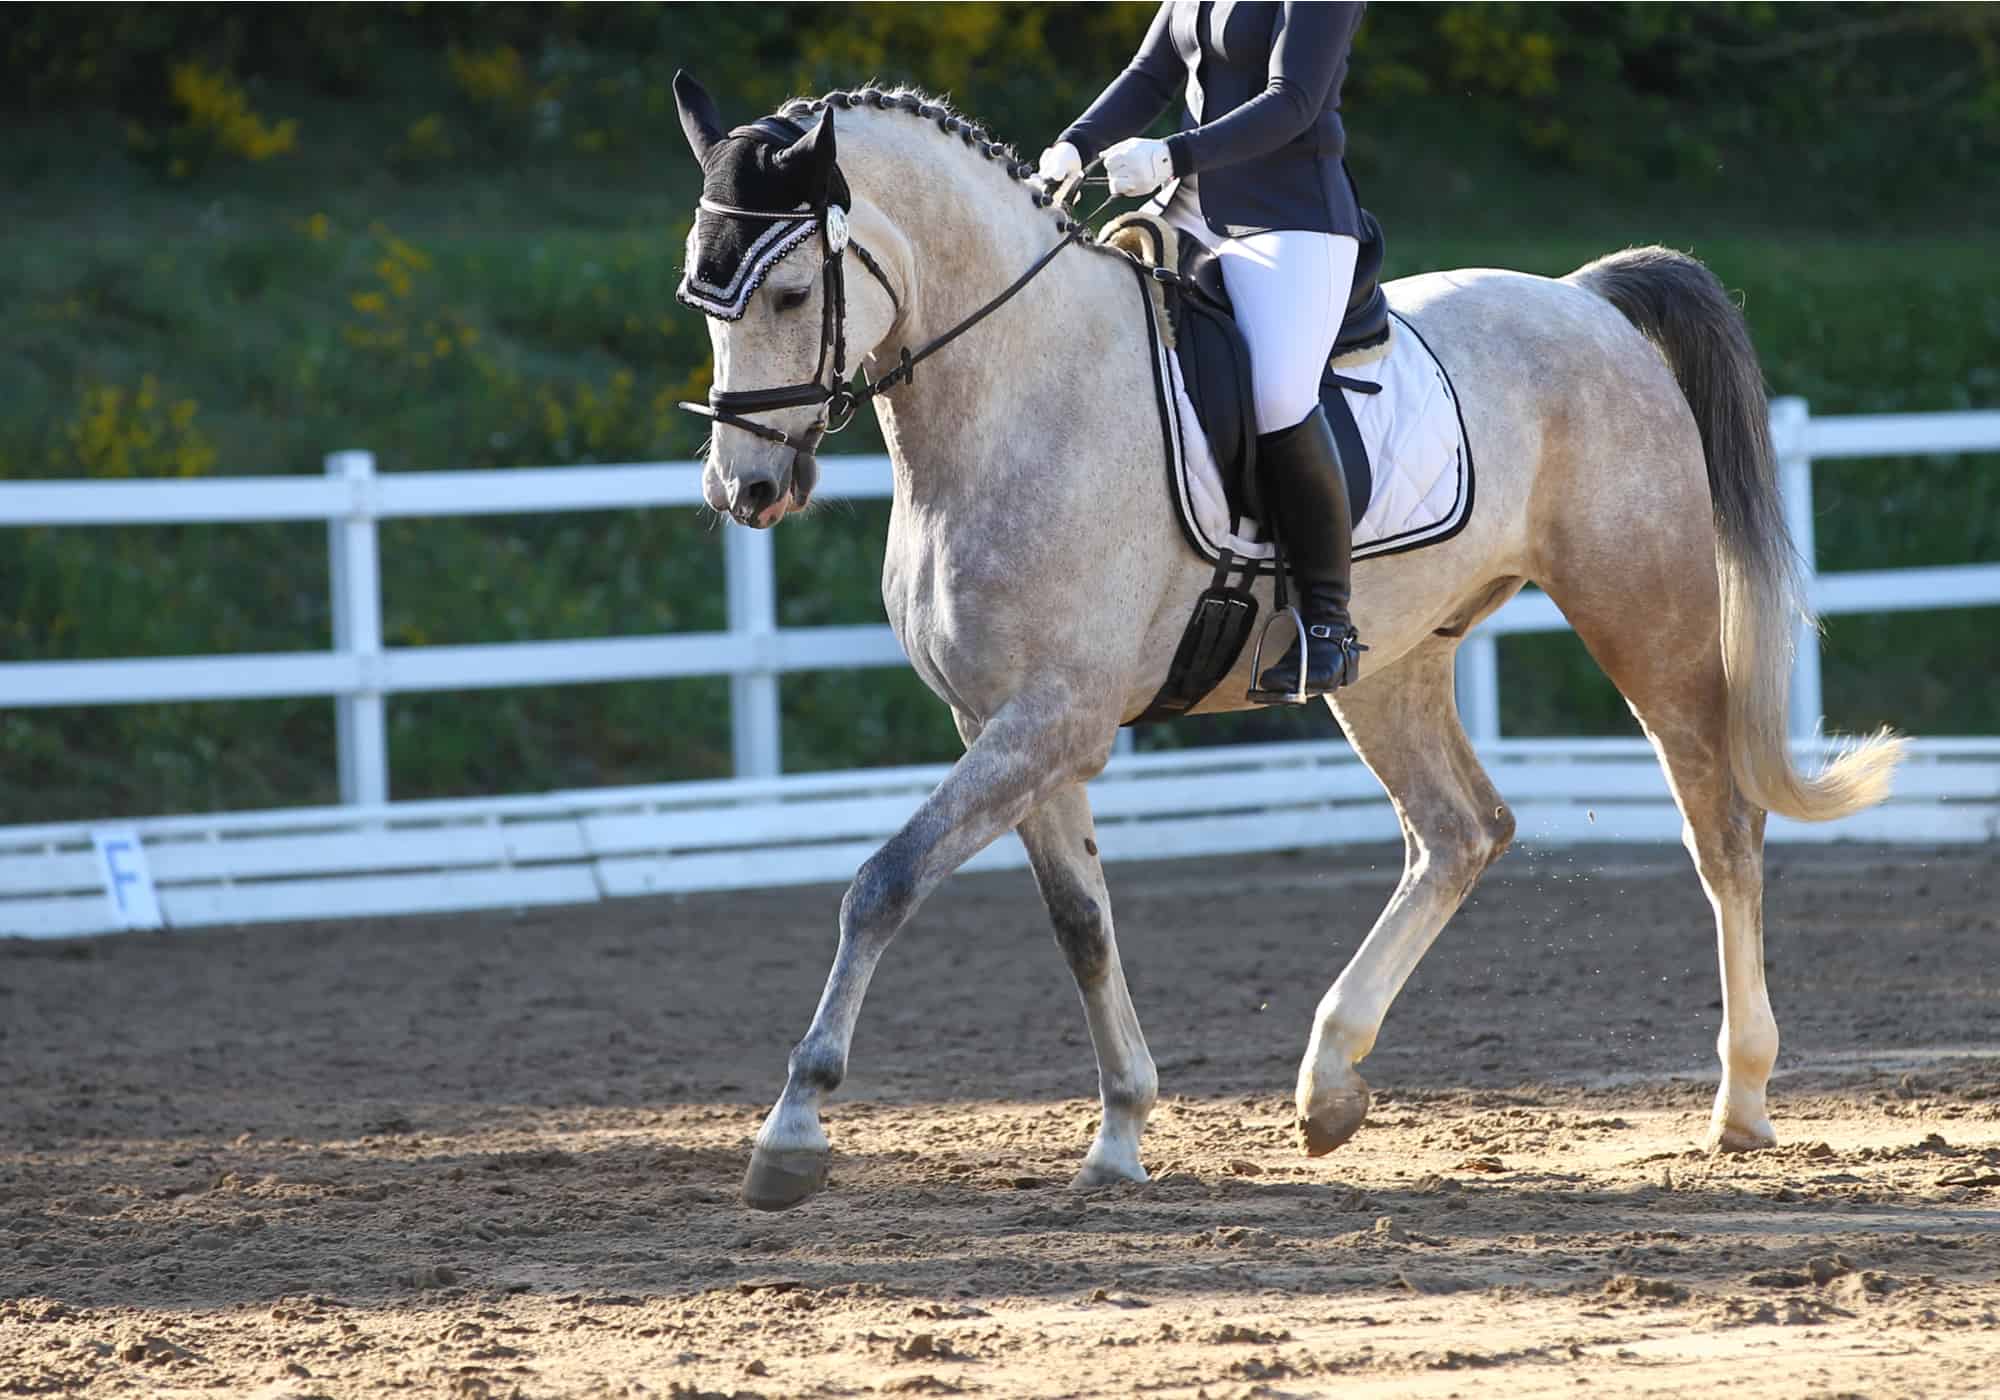 Can any horse be gaited?